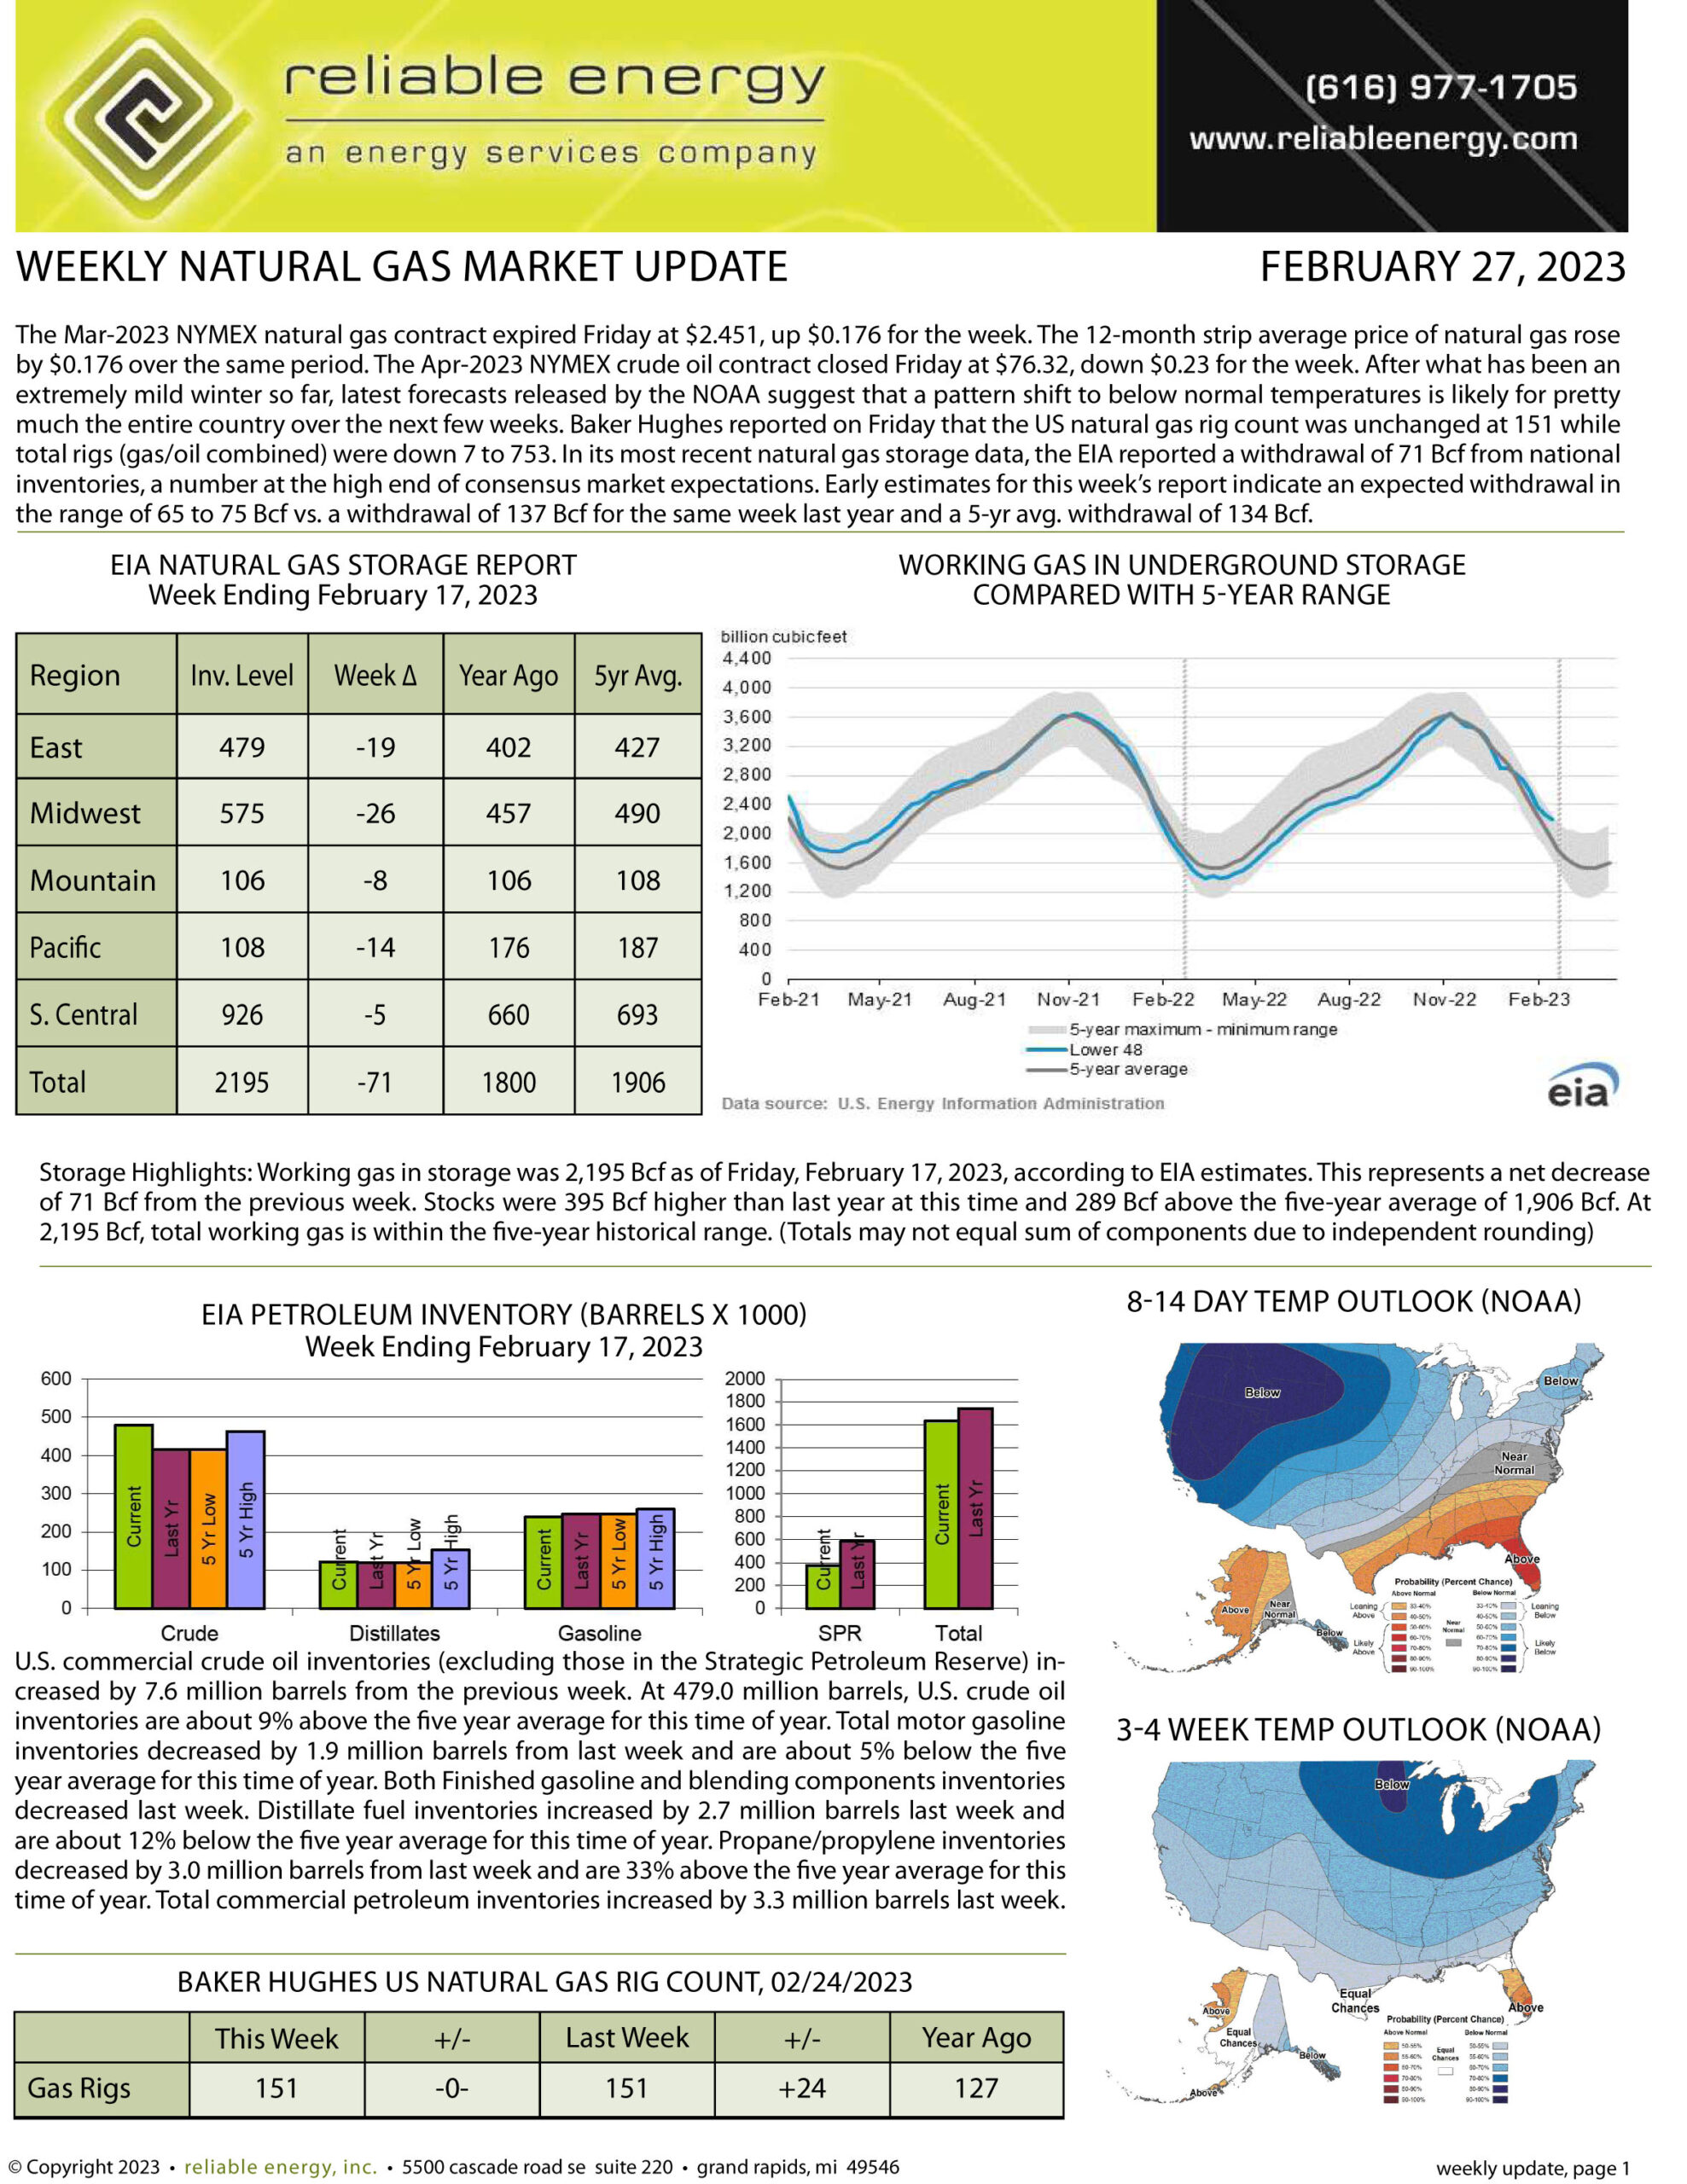 Natural Gas Market Update – February 27, 2023